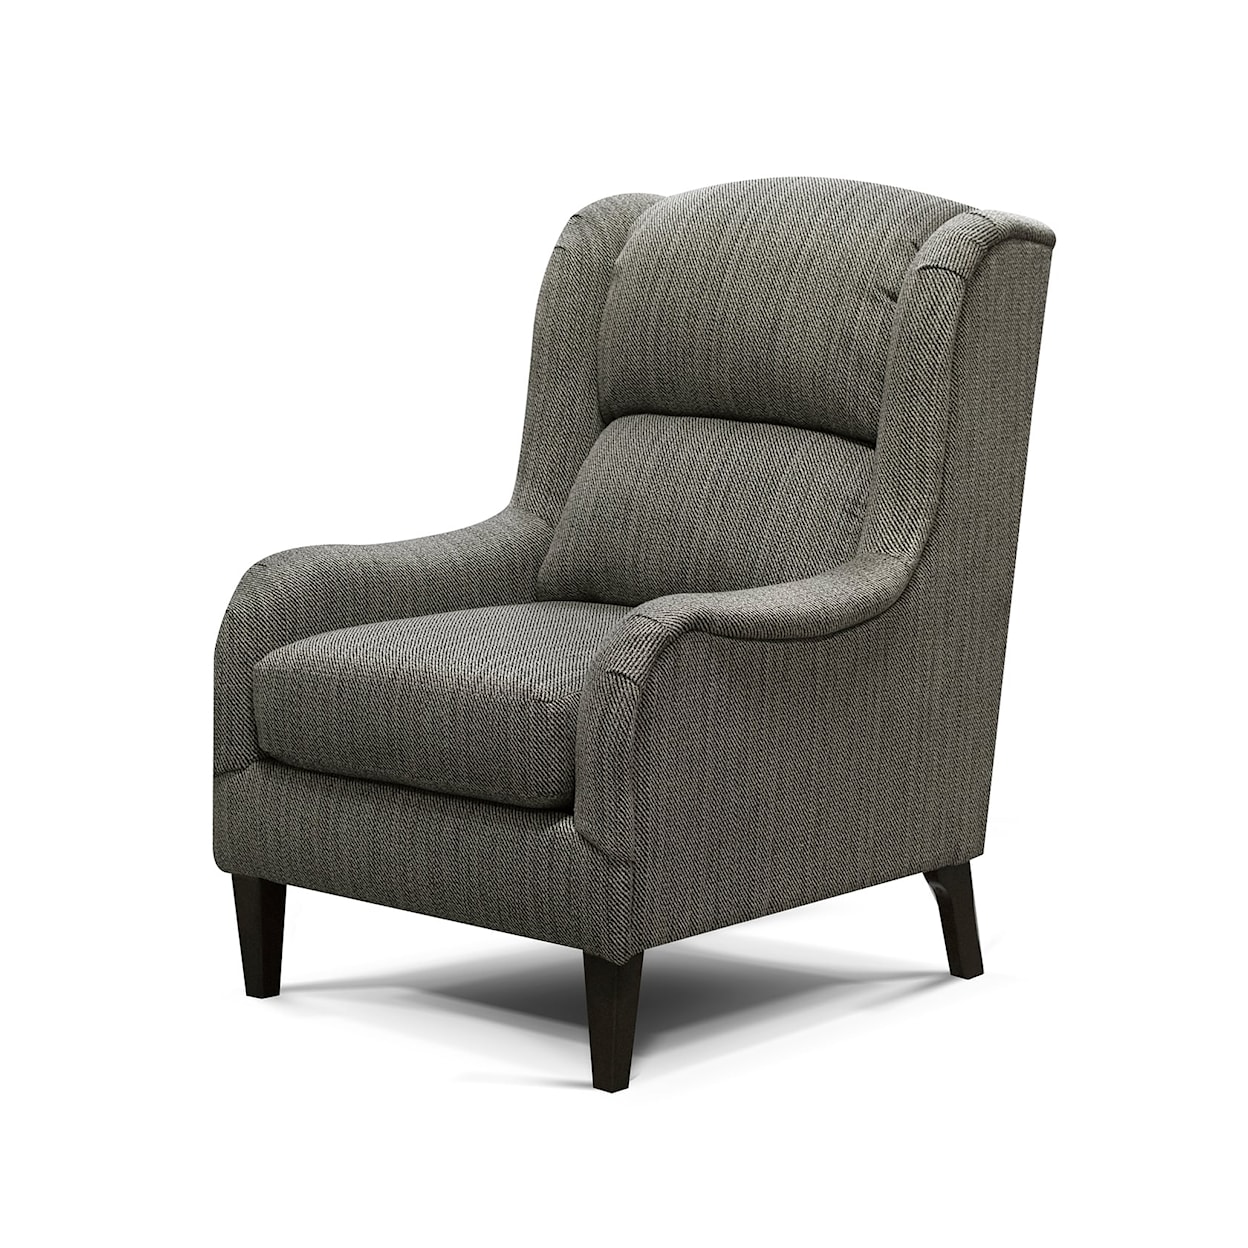 England 2580 Series Accent Chair